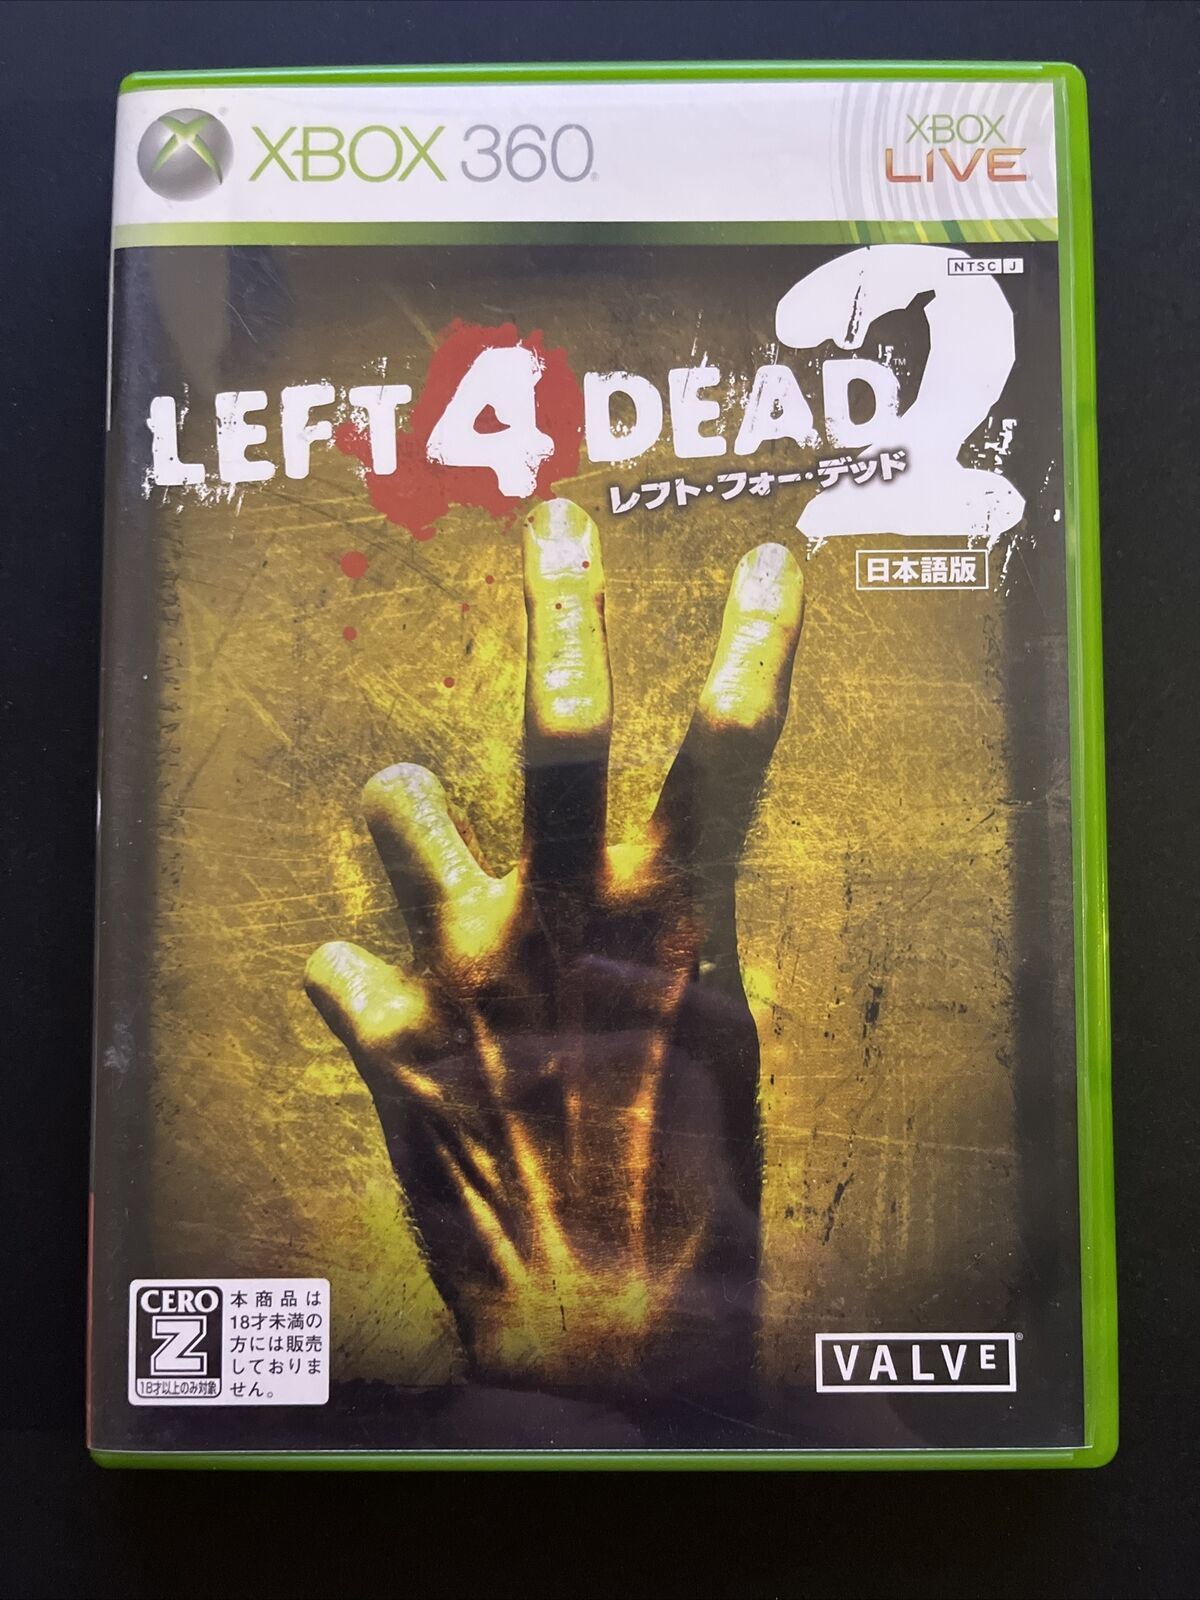 Left 4 Dead 2 - Microsoft XBOX 360 NTSC-J JAPAN Game Complete with Manual